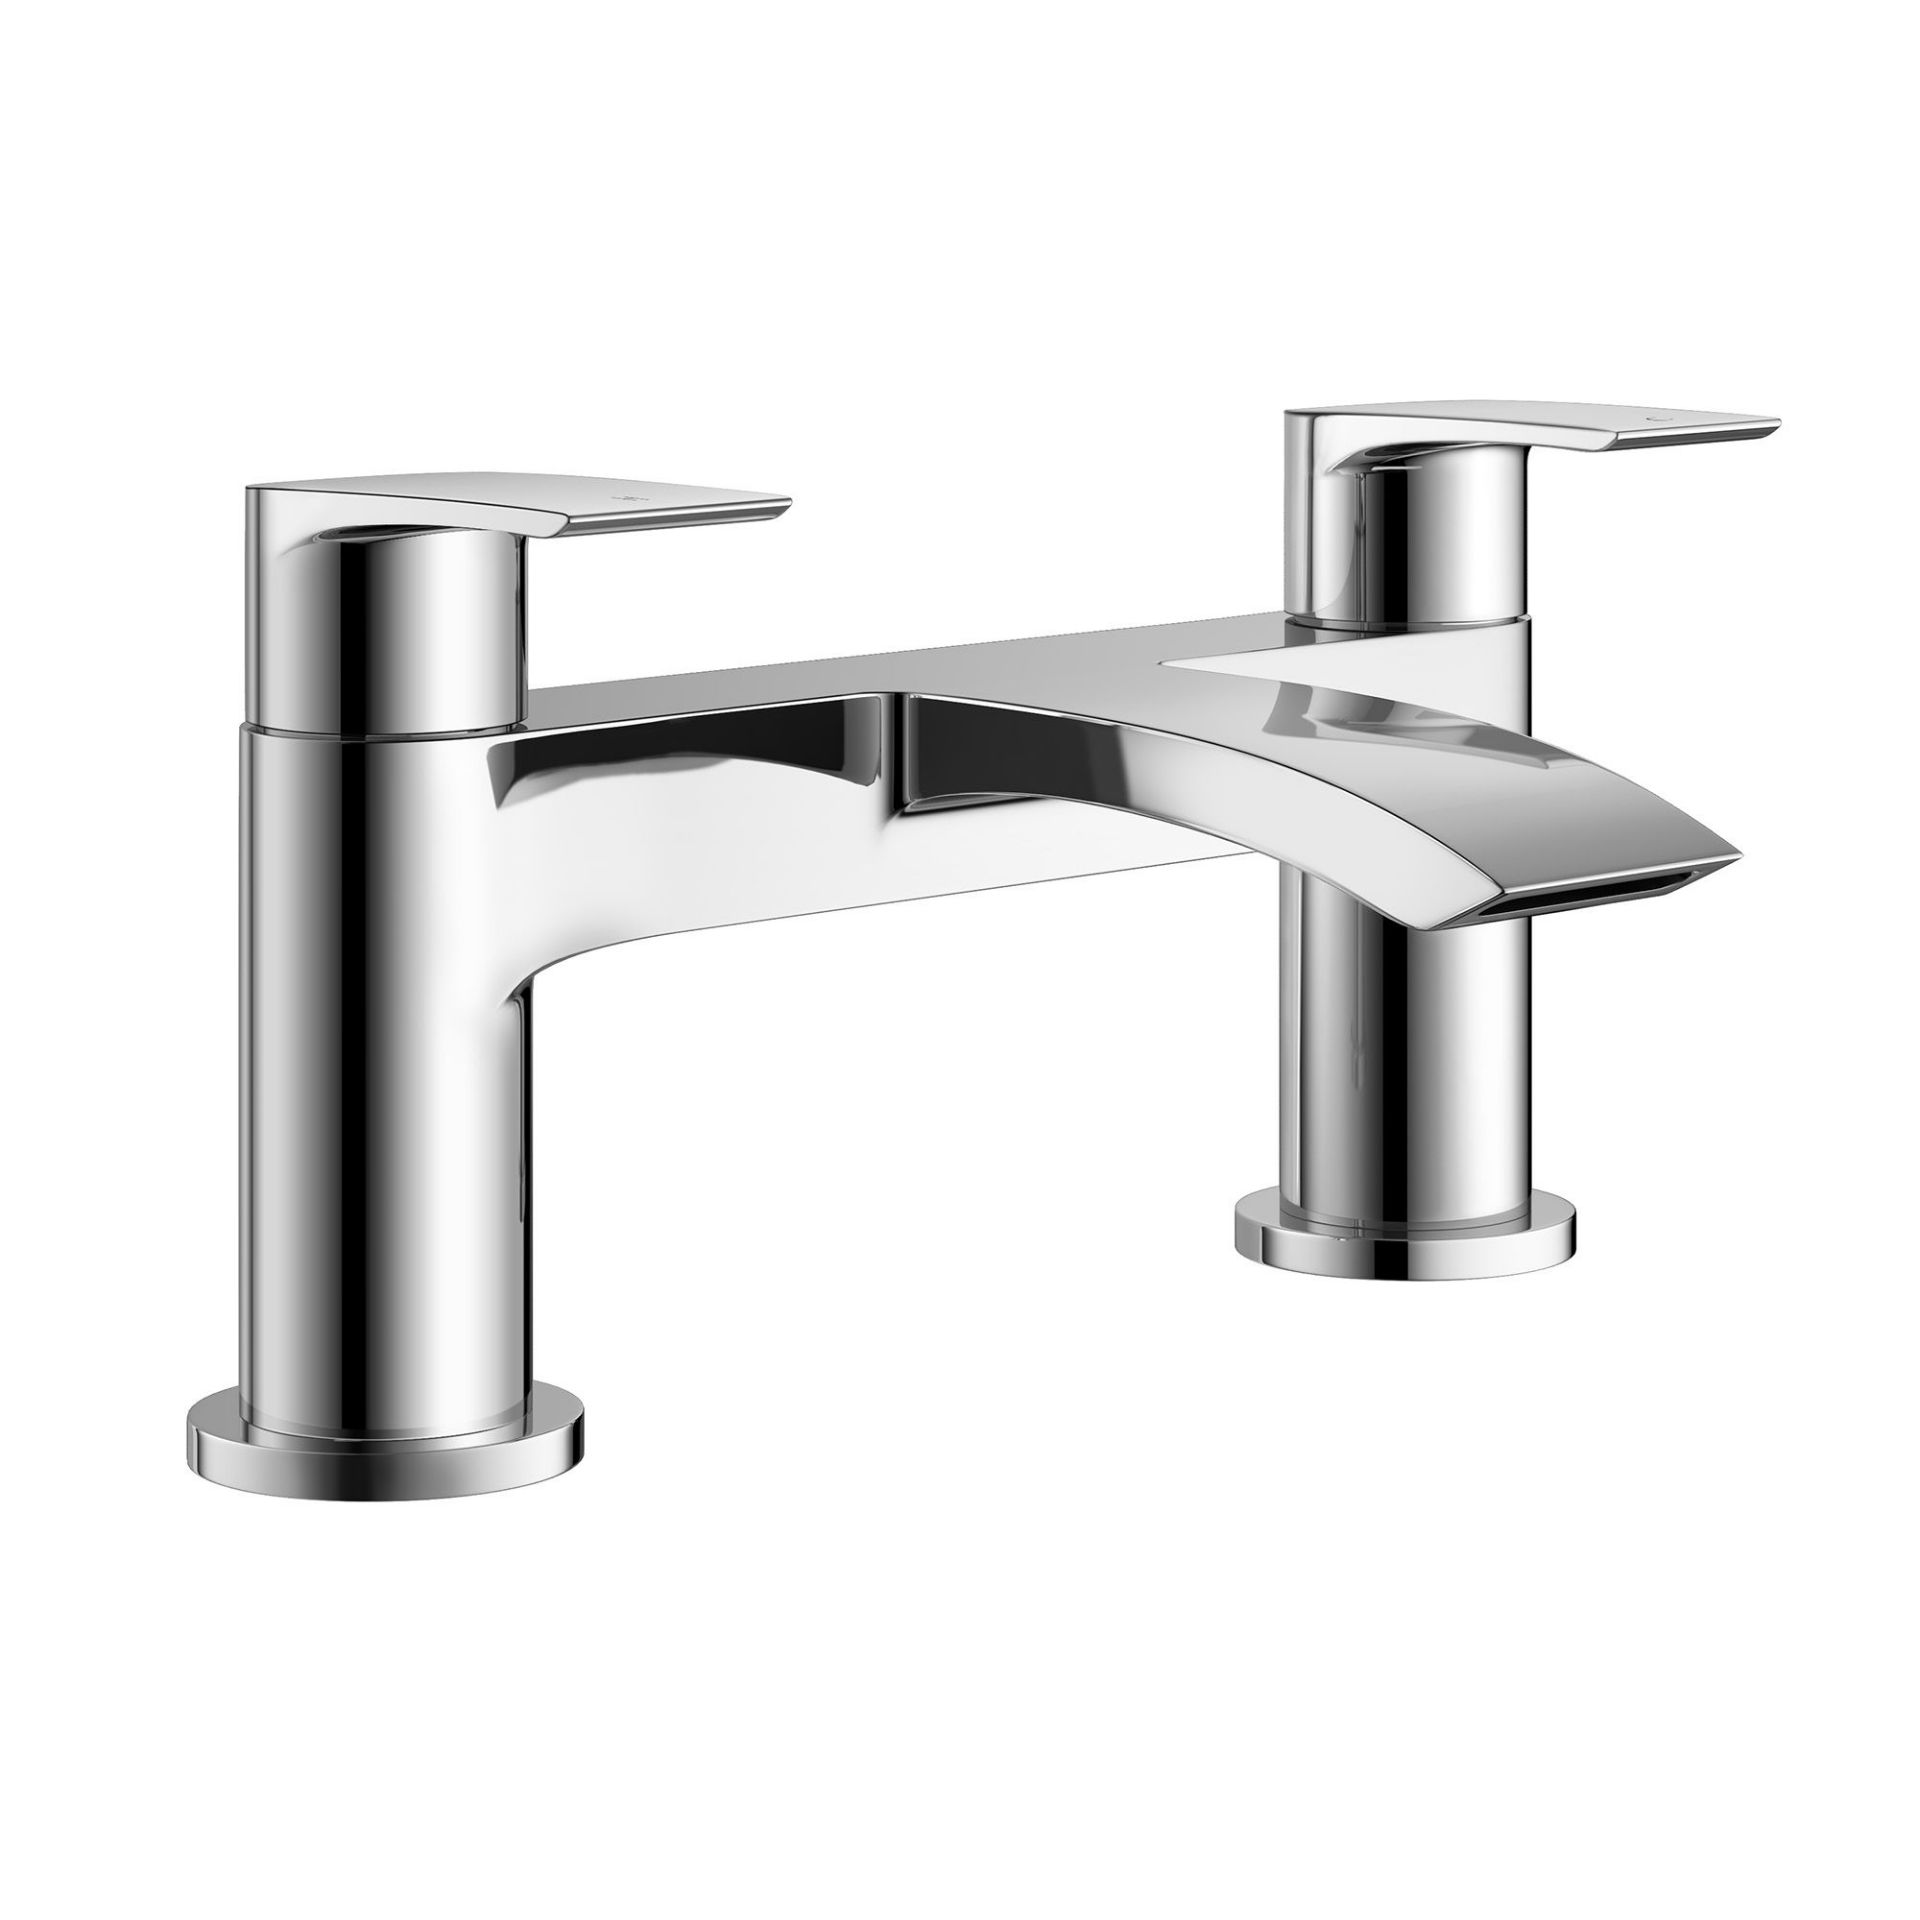 (CC173) Melbourne Bath Filler Mixer Tap Chrome Plated Solid Brass 1/4 turn solid brass valve ... - Image 2 of 2